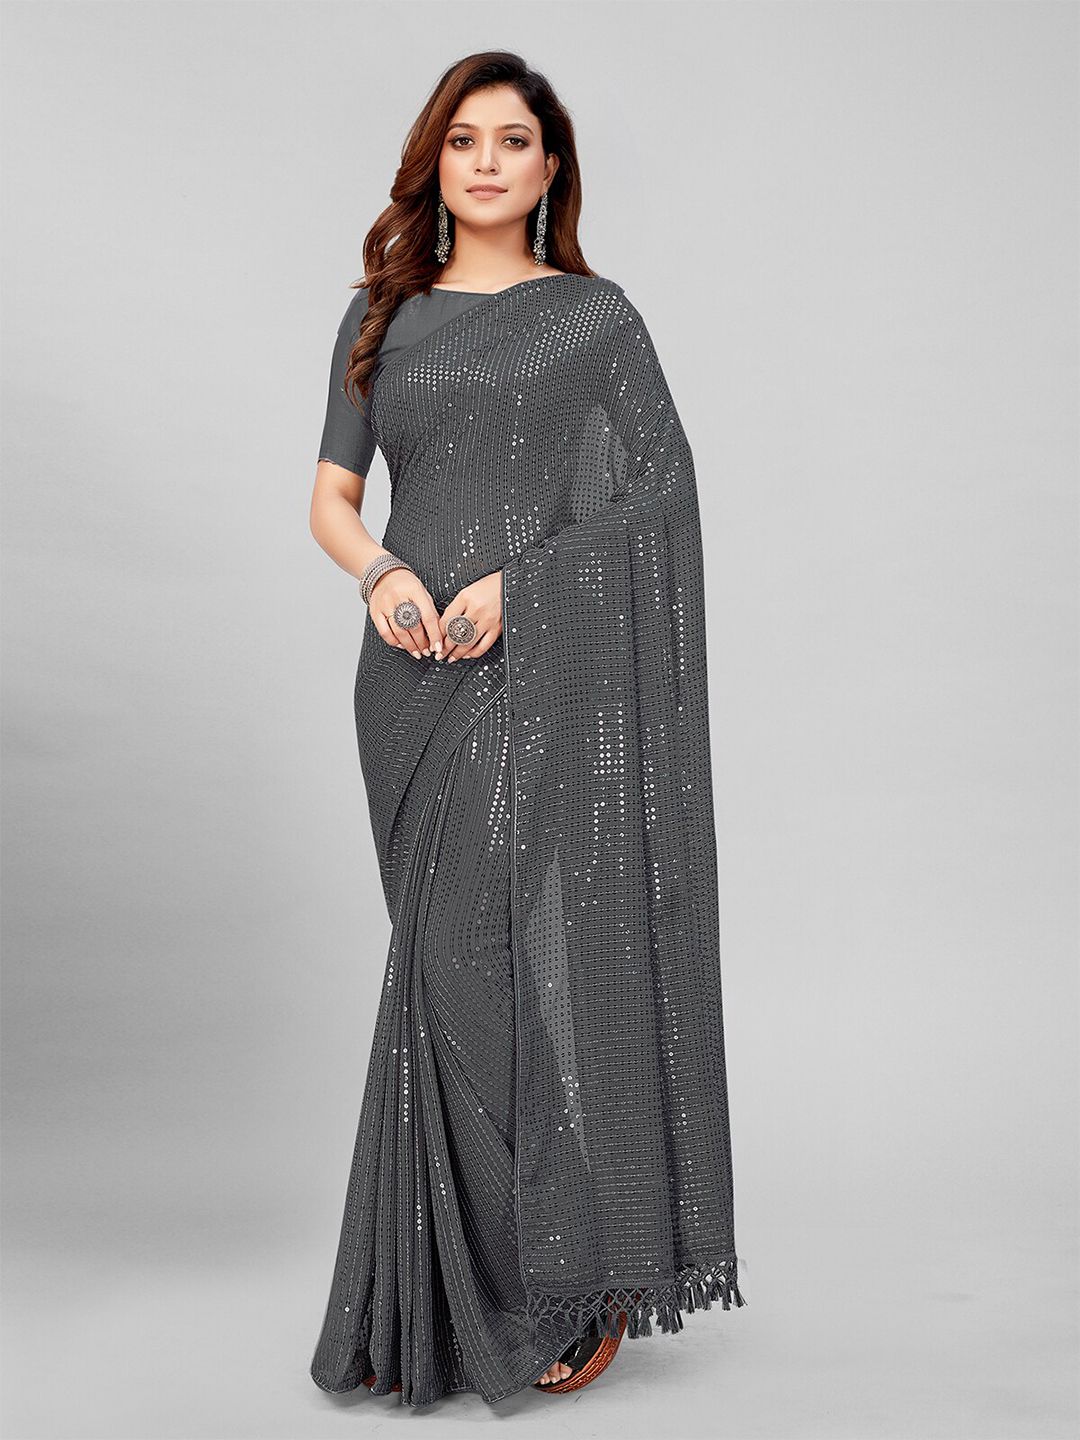 Pratham Blue Grey Embellished Sequinned Pure Georgette Saree Price in India